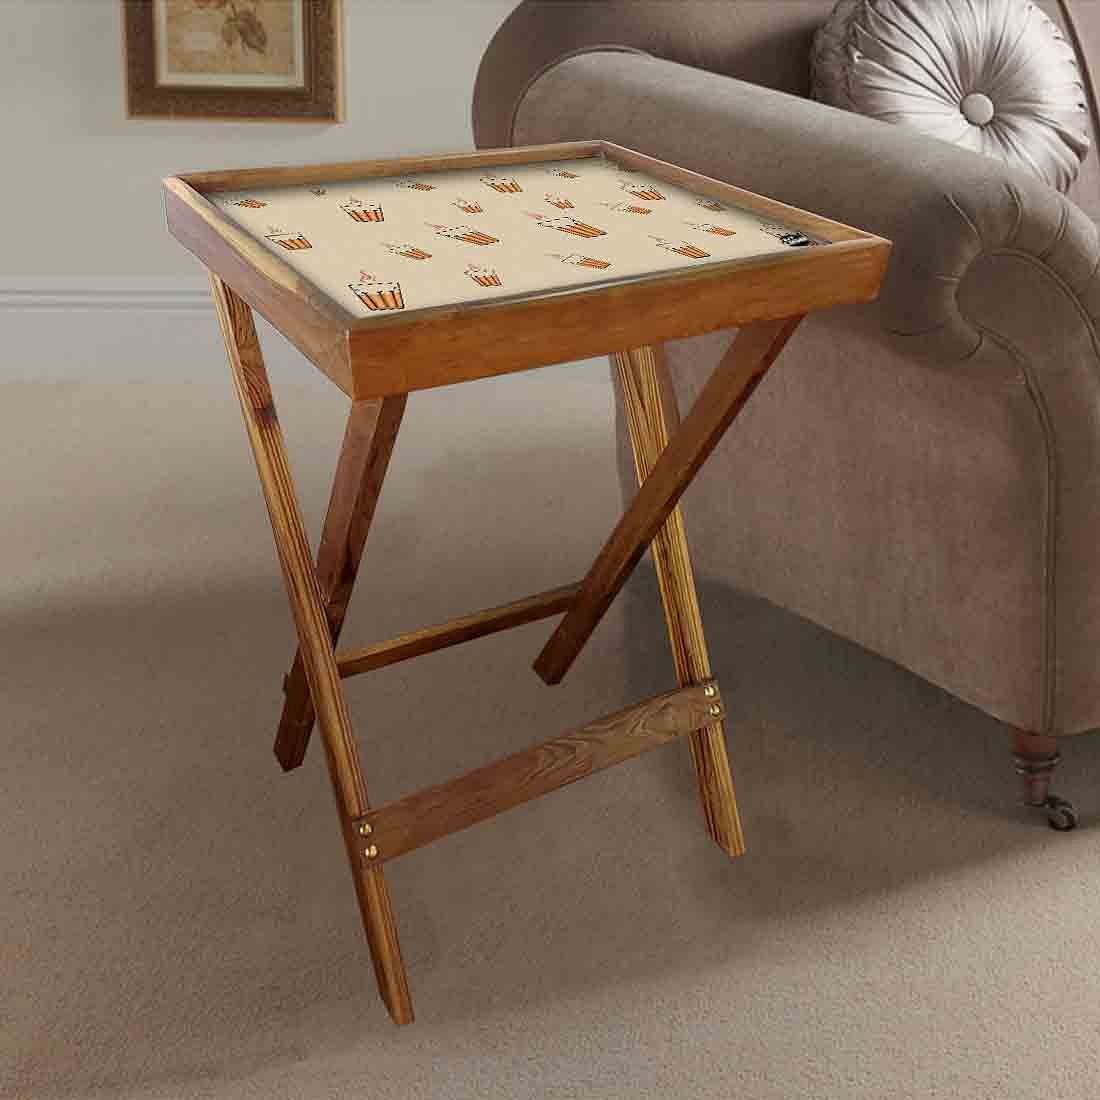 Foldable Side Table for TV Tray Tables Living Room - Tea Nutcase